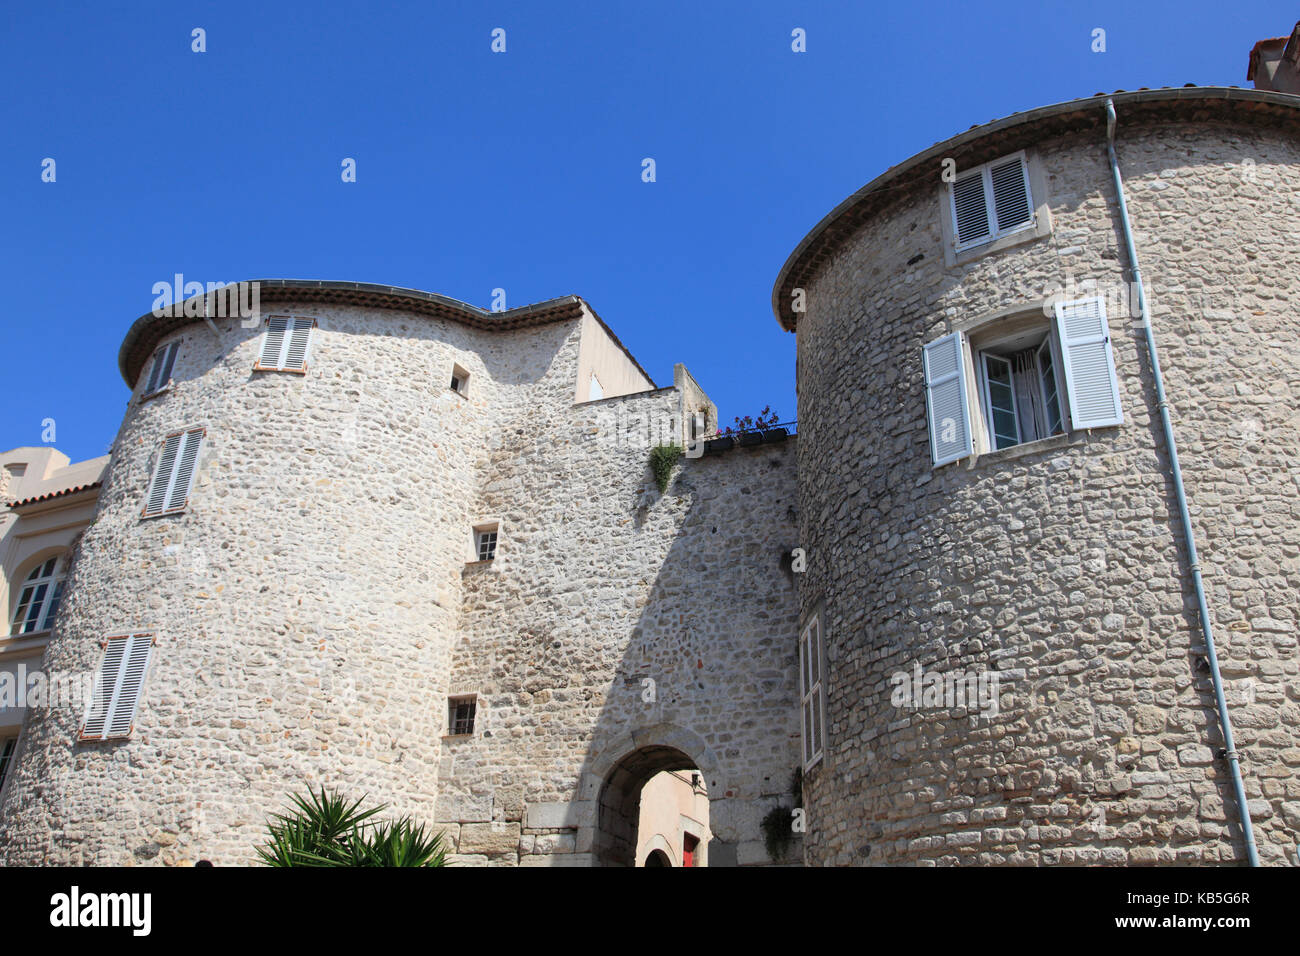 Portail de l'Orme (Gate of the Elm), Old Town, Vieil Antibes, Antibes, Cote d'Azur, French Riviera, Provence, France, Europe Stock Photo